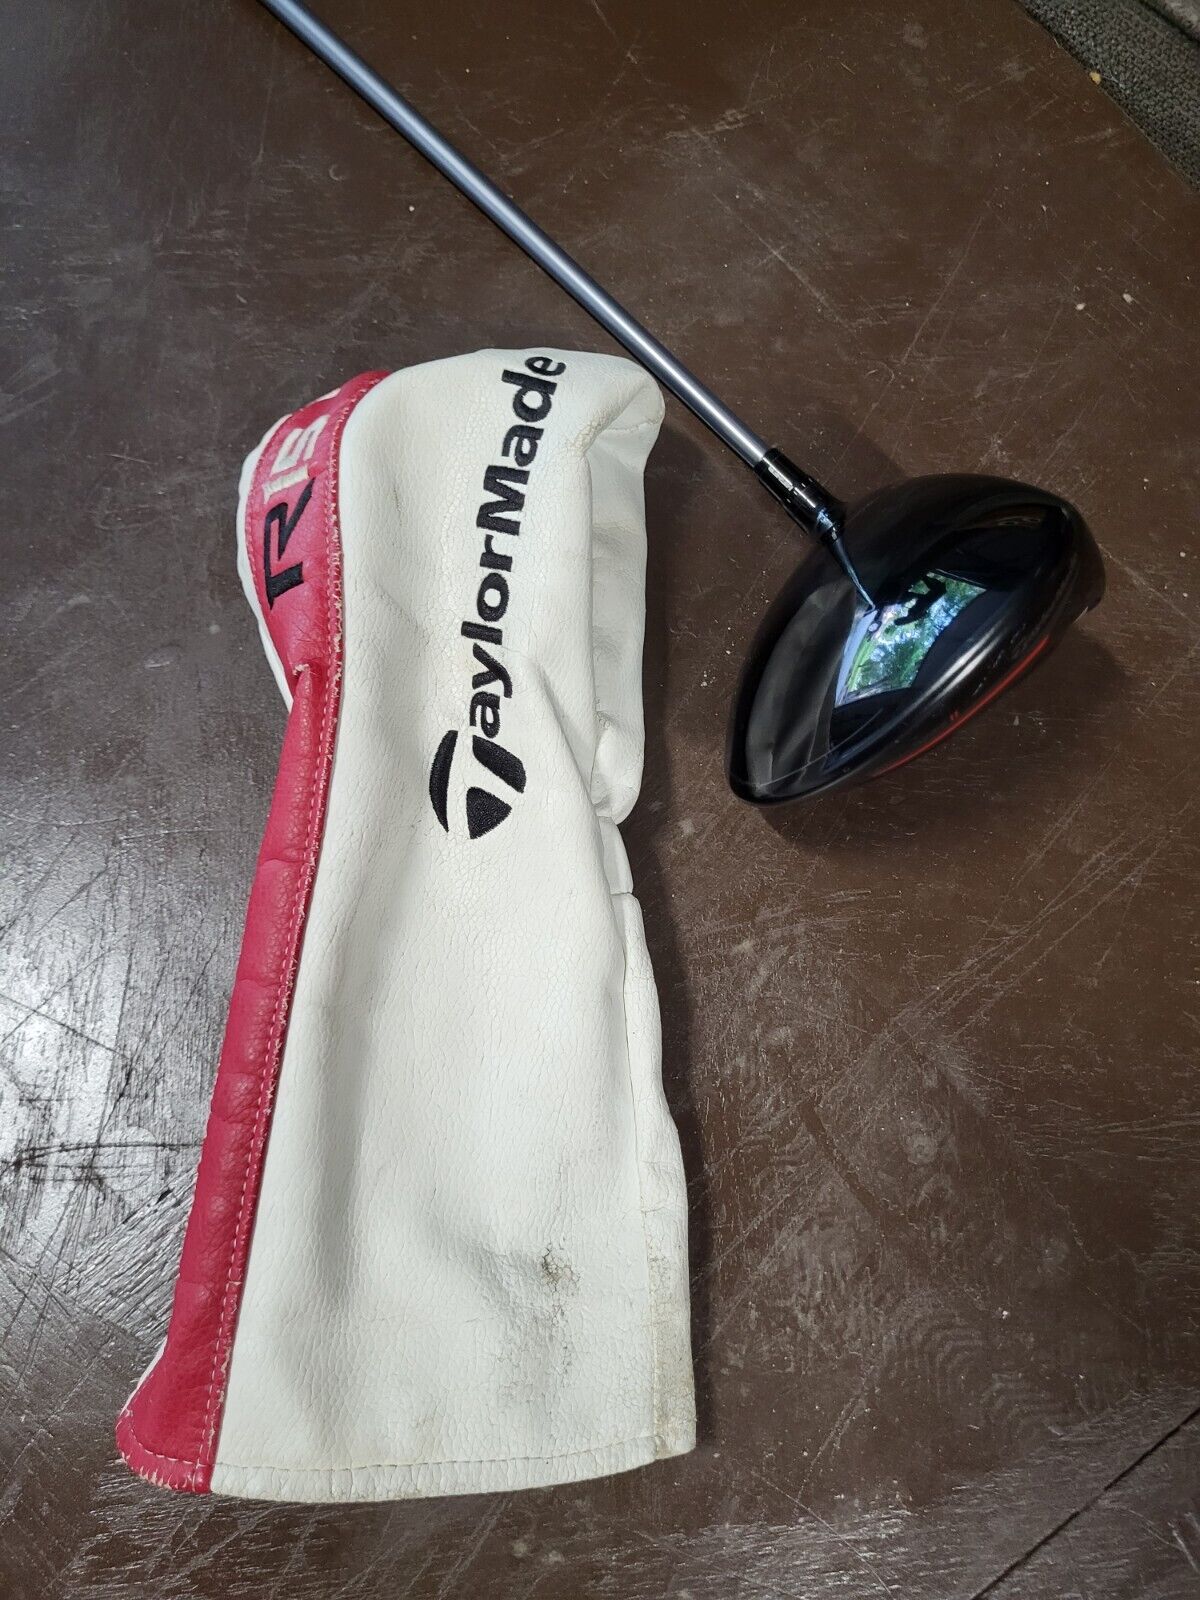 Taylormade R15 driver